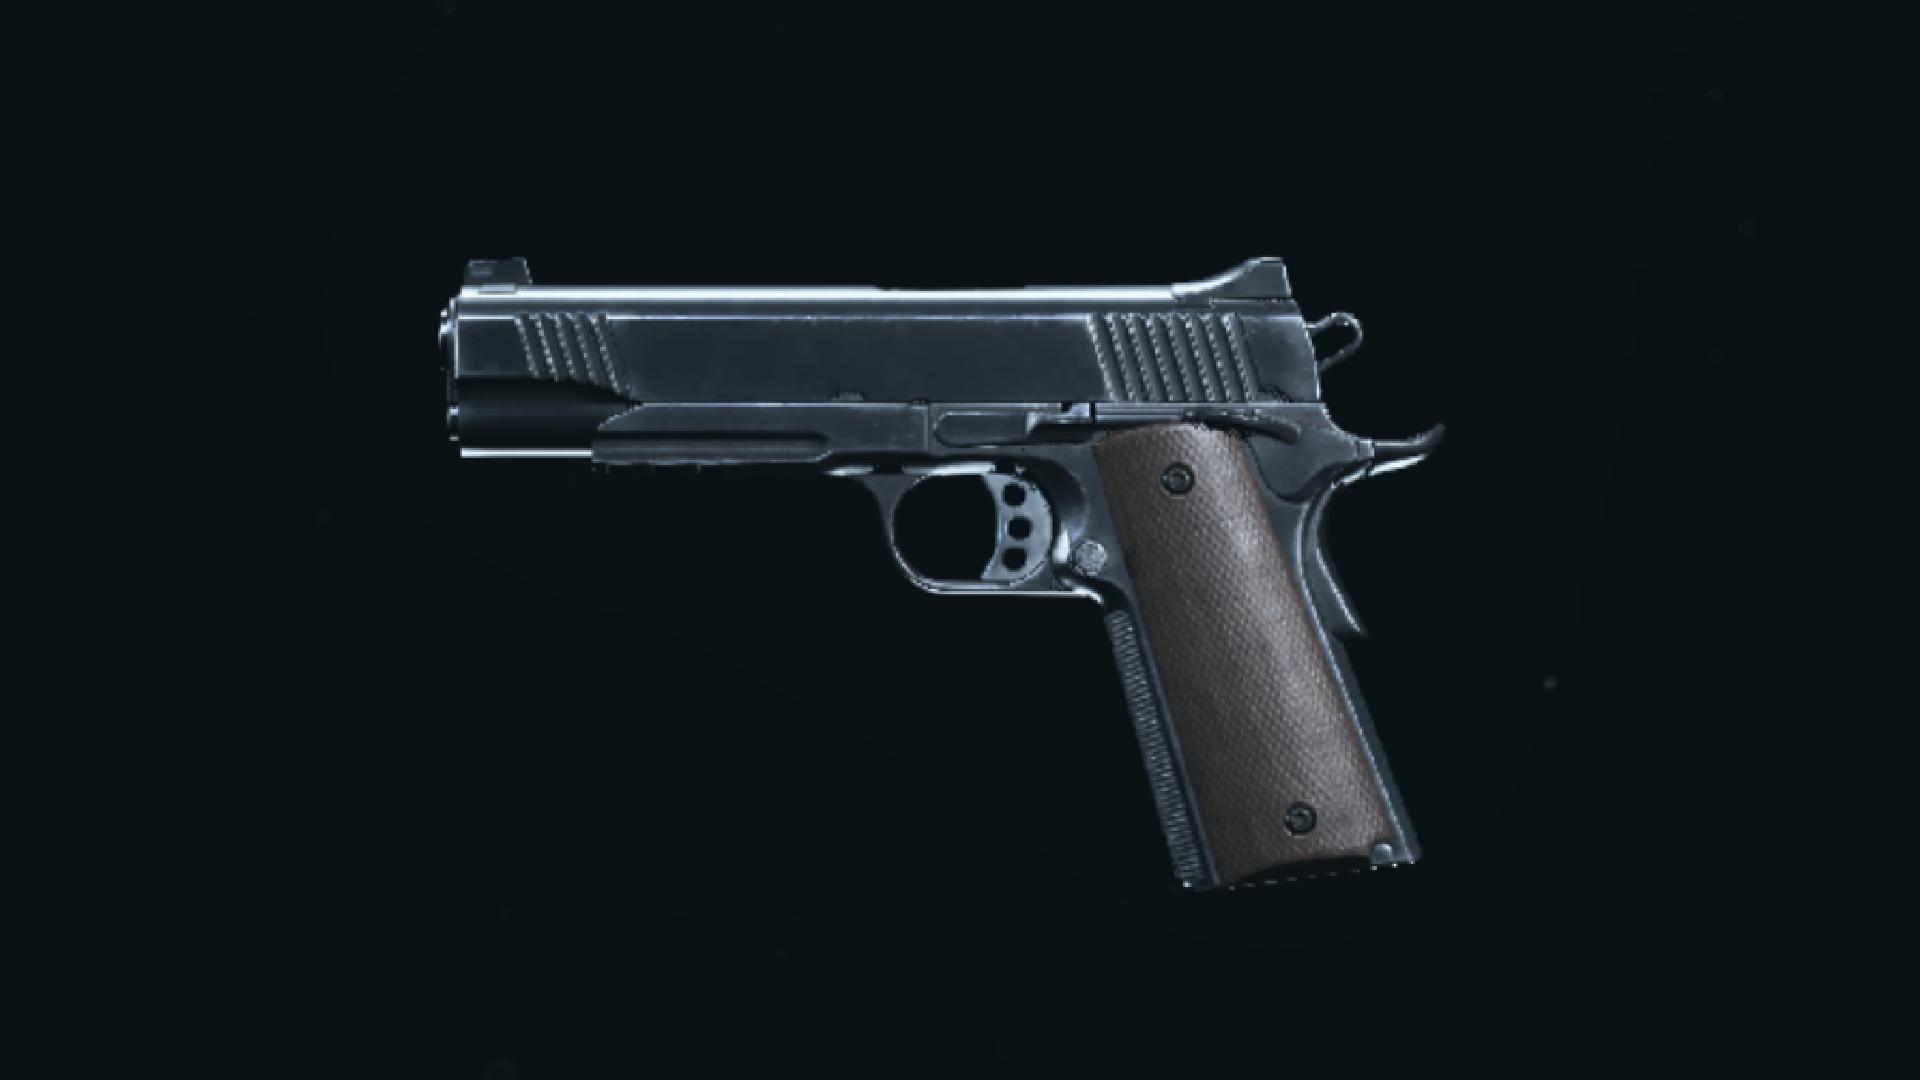 CoD Vanguard launch weapons: The 1911 as pictured in a previous CoD game. 